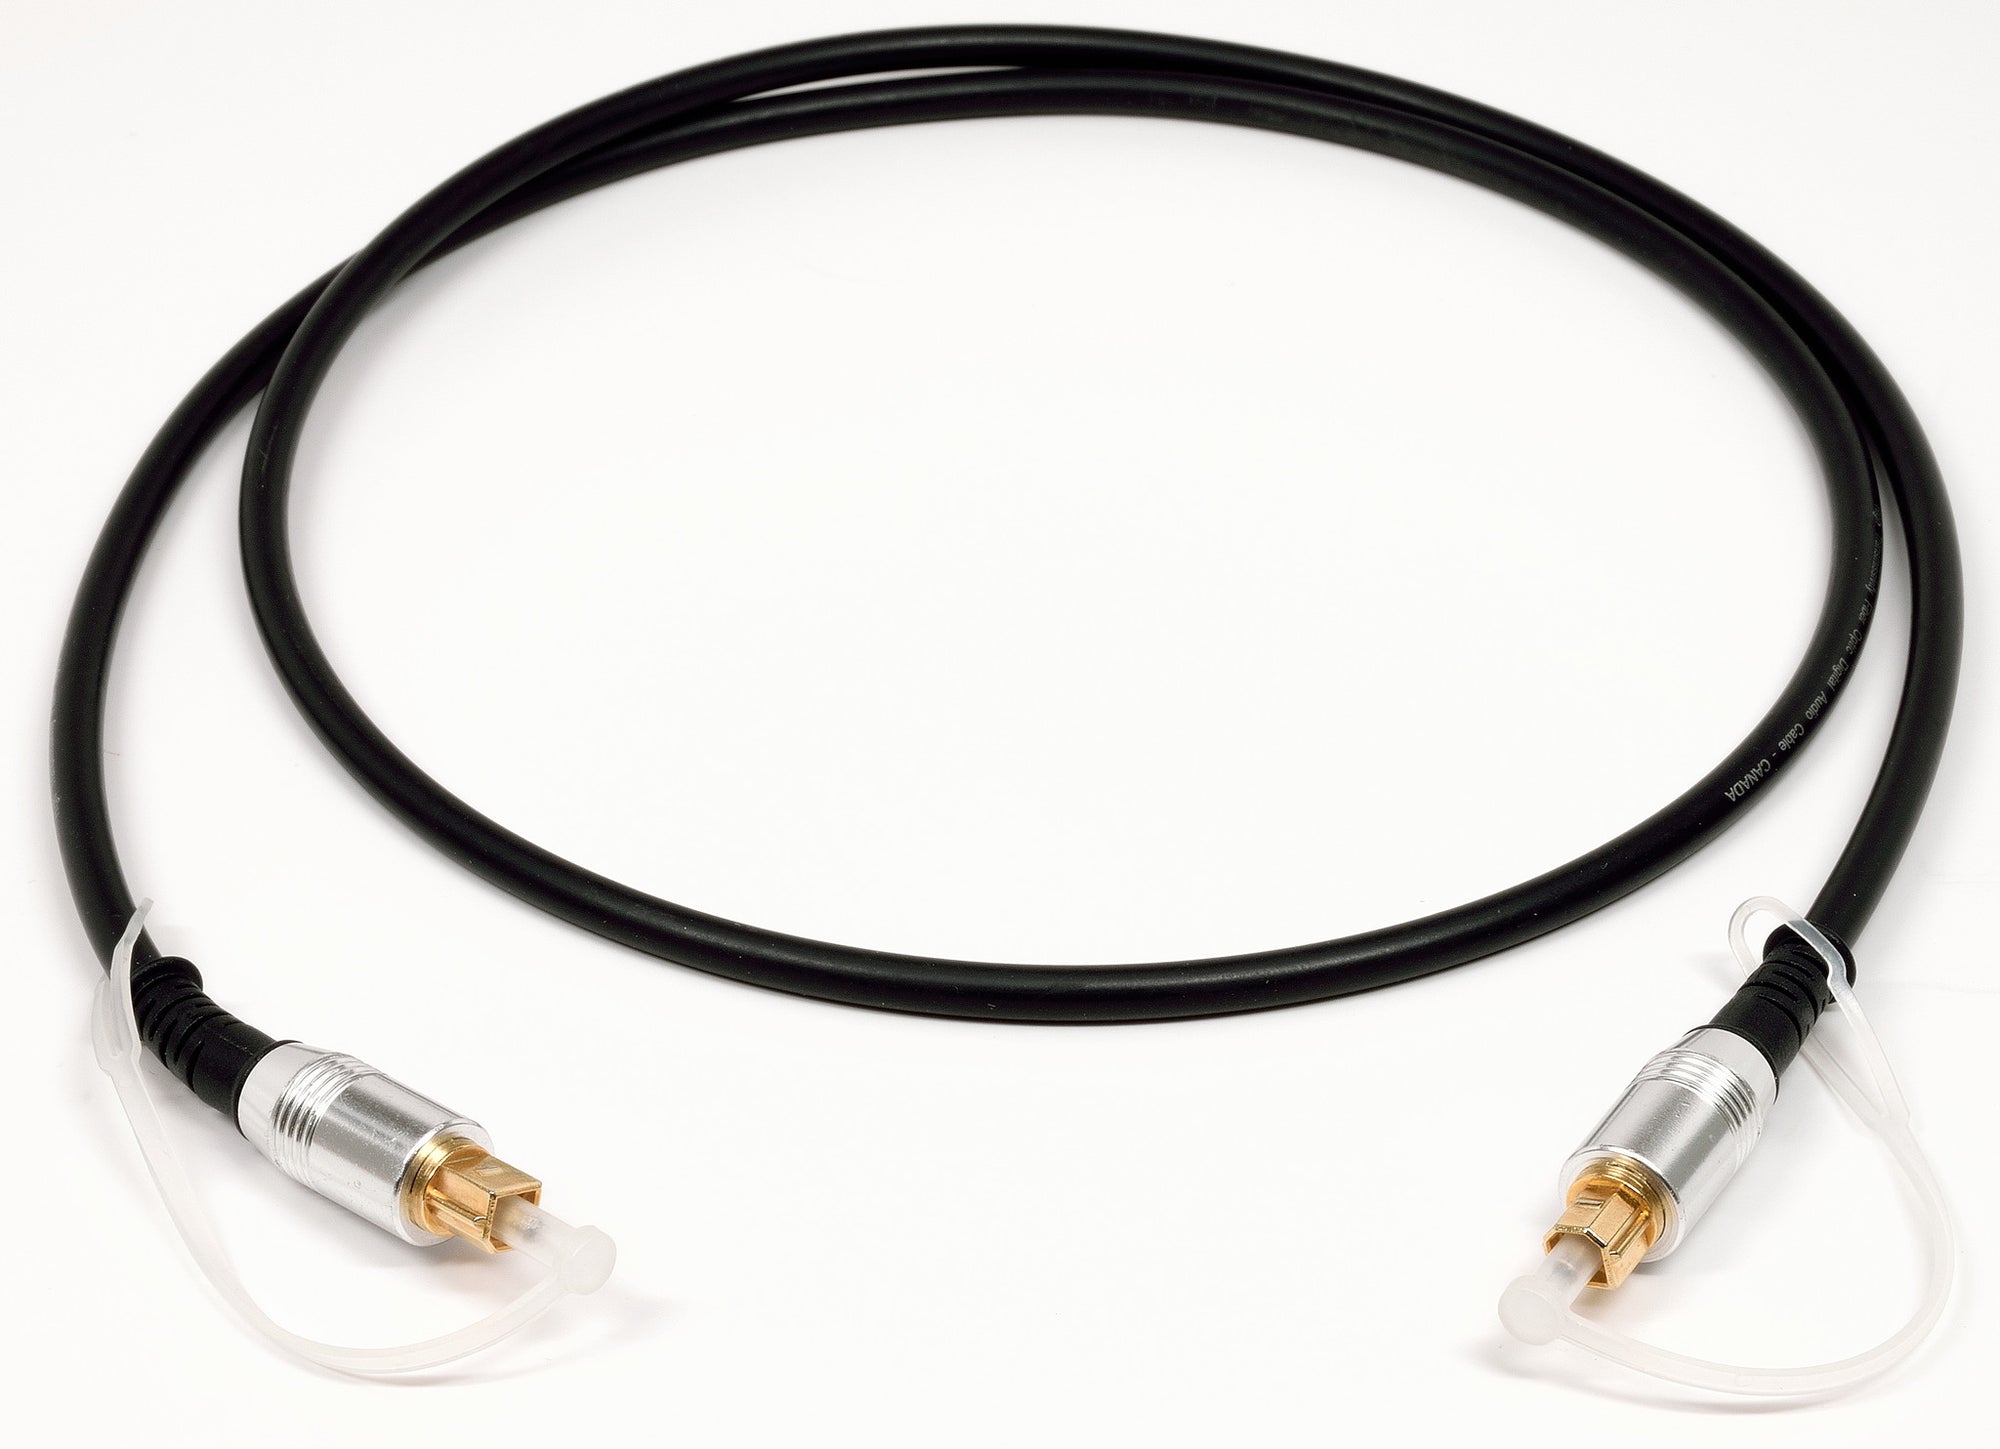 TOSLINK Digital Audio Cable with Metal ends - coil 